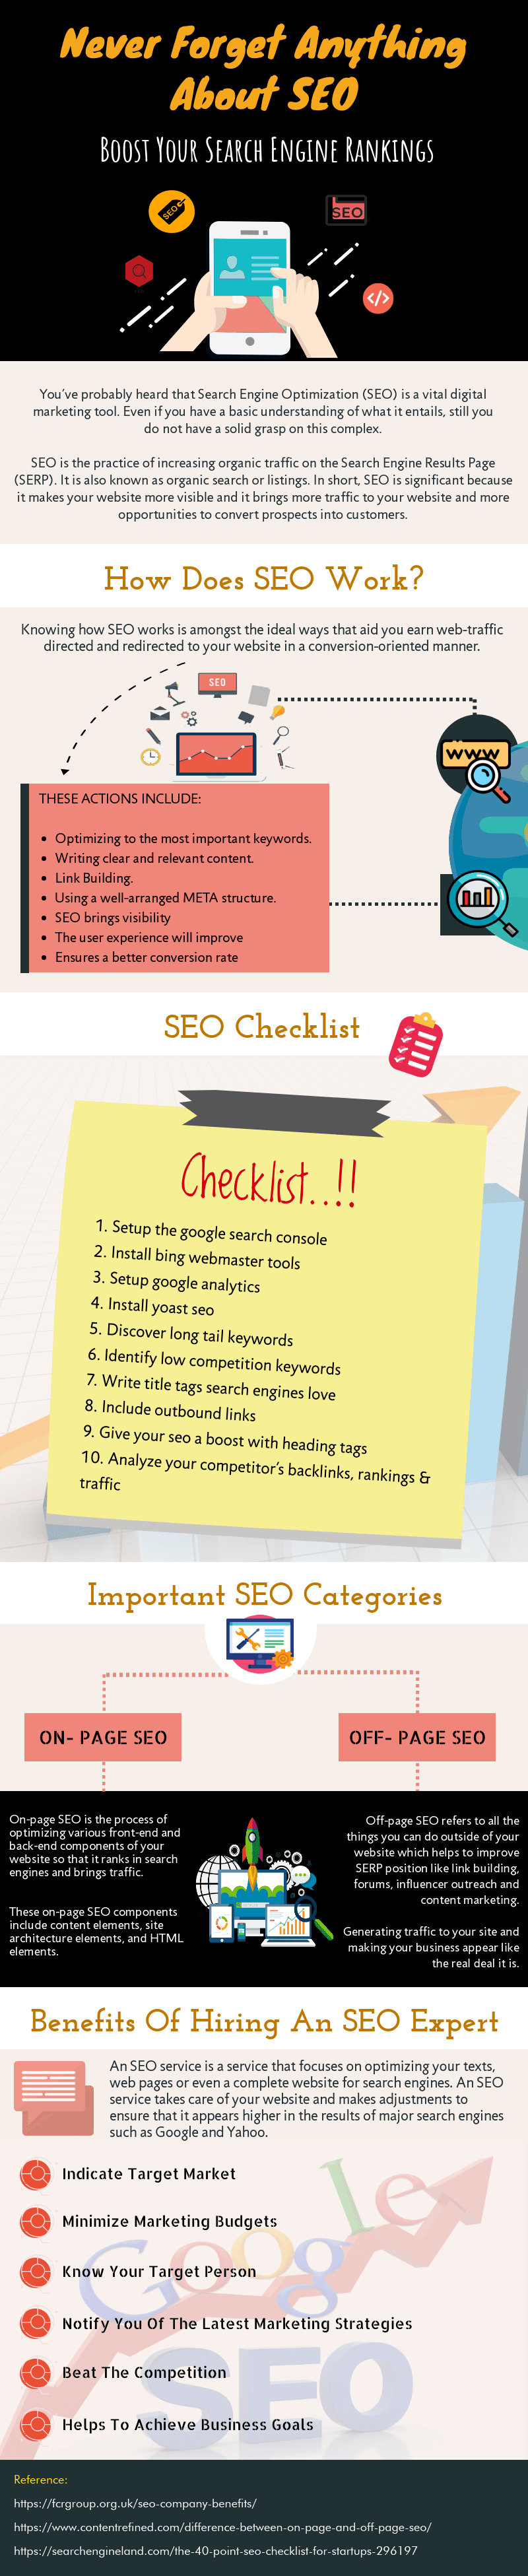 boost your search engine ranking with SEO infographics